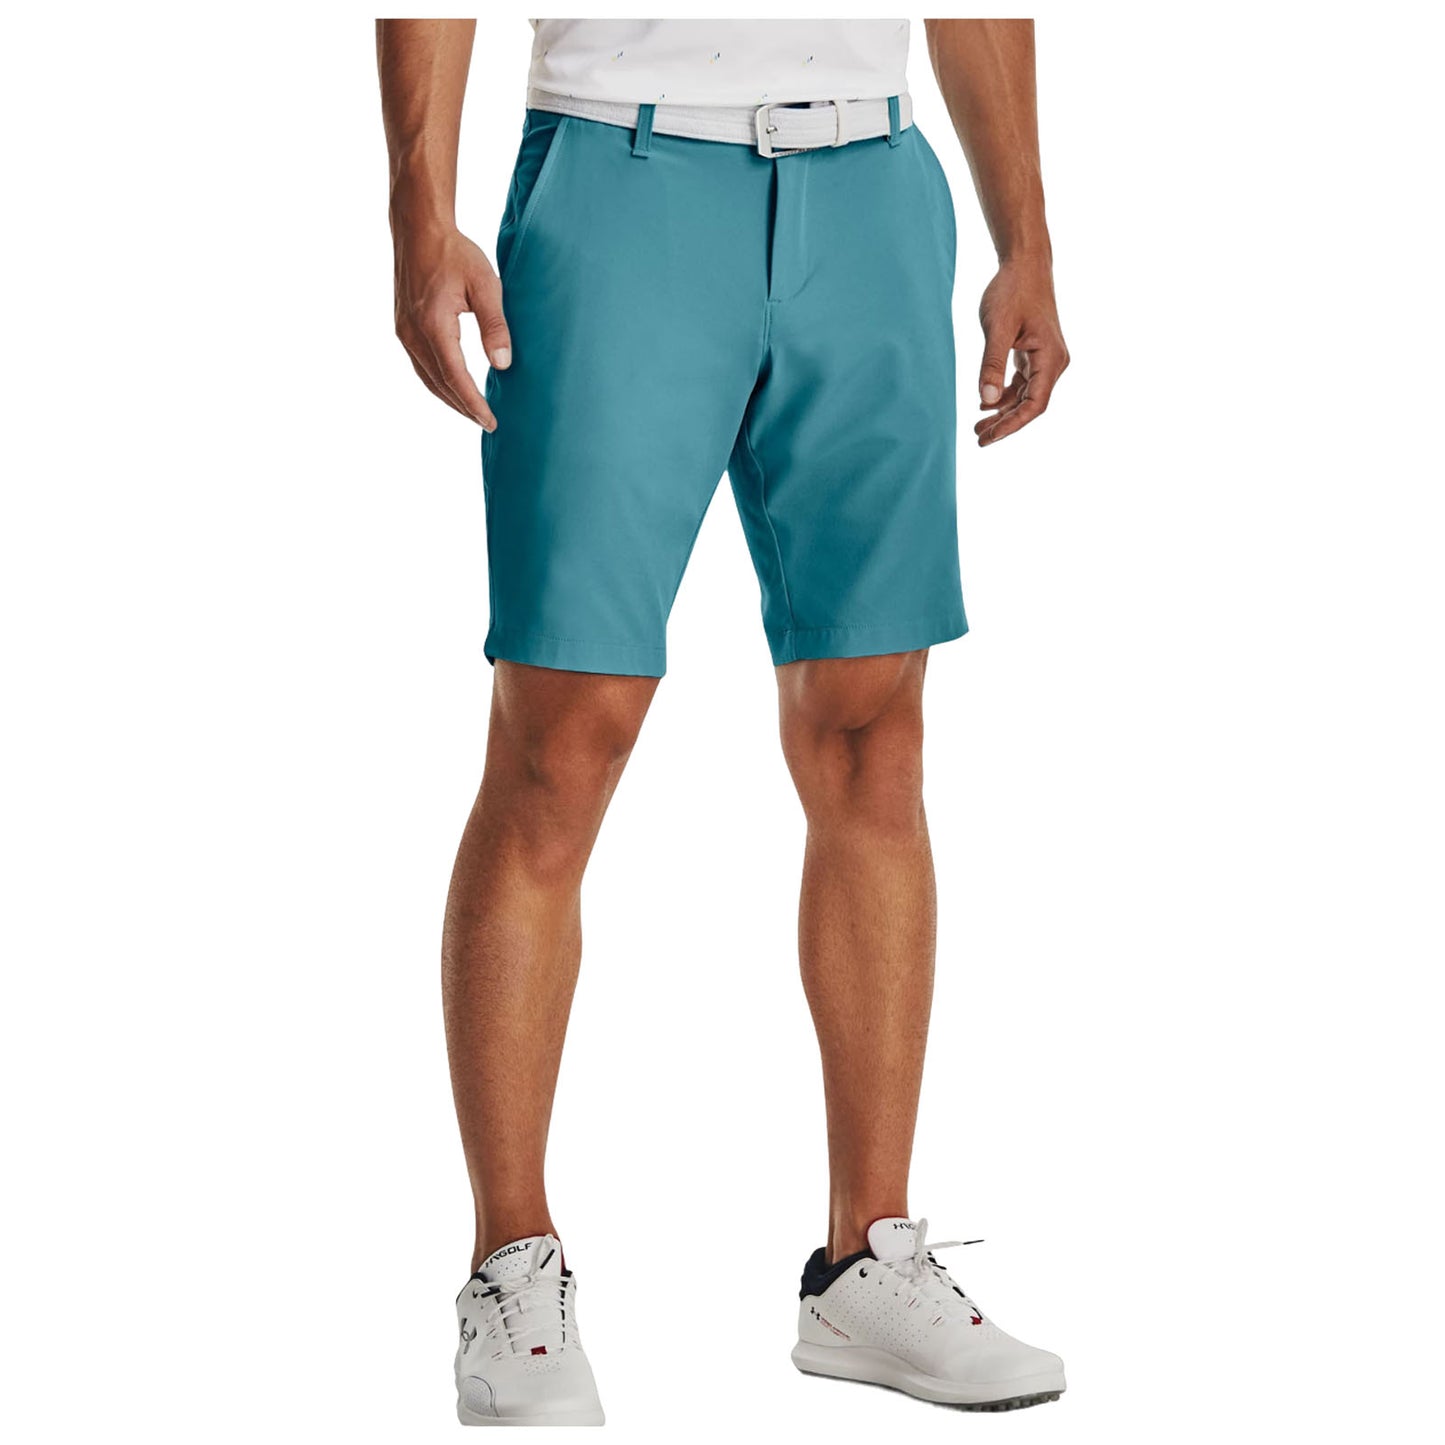 Under Armour Mens Drive Tapered Shorts